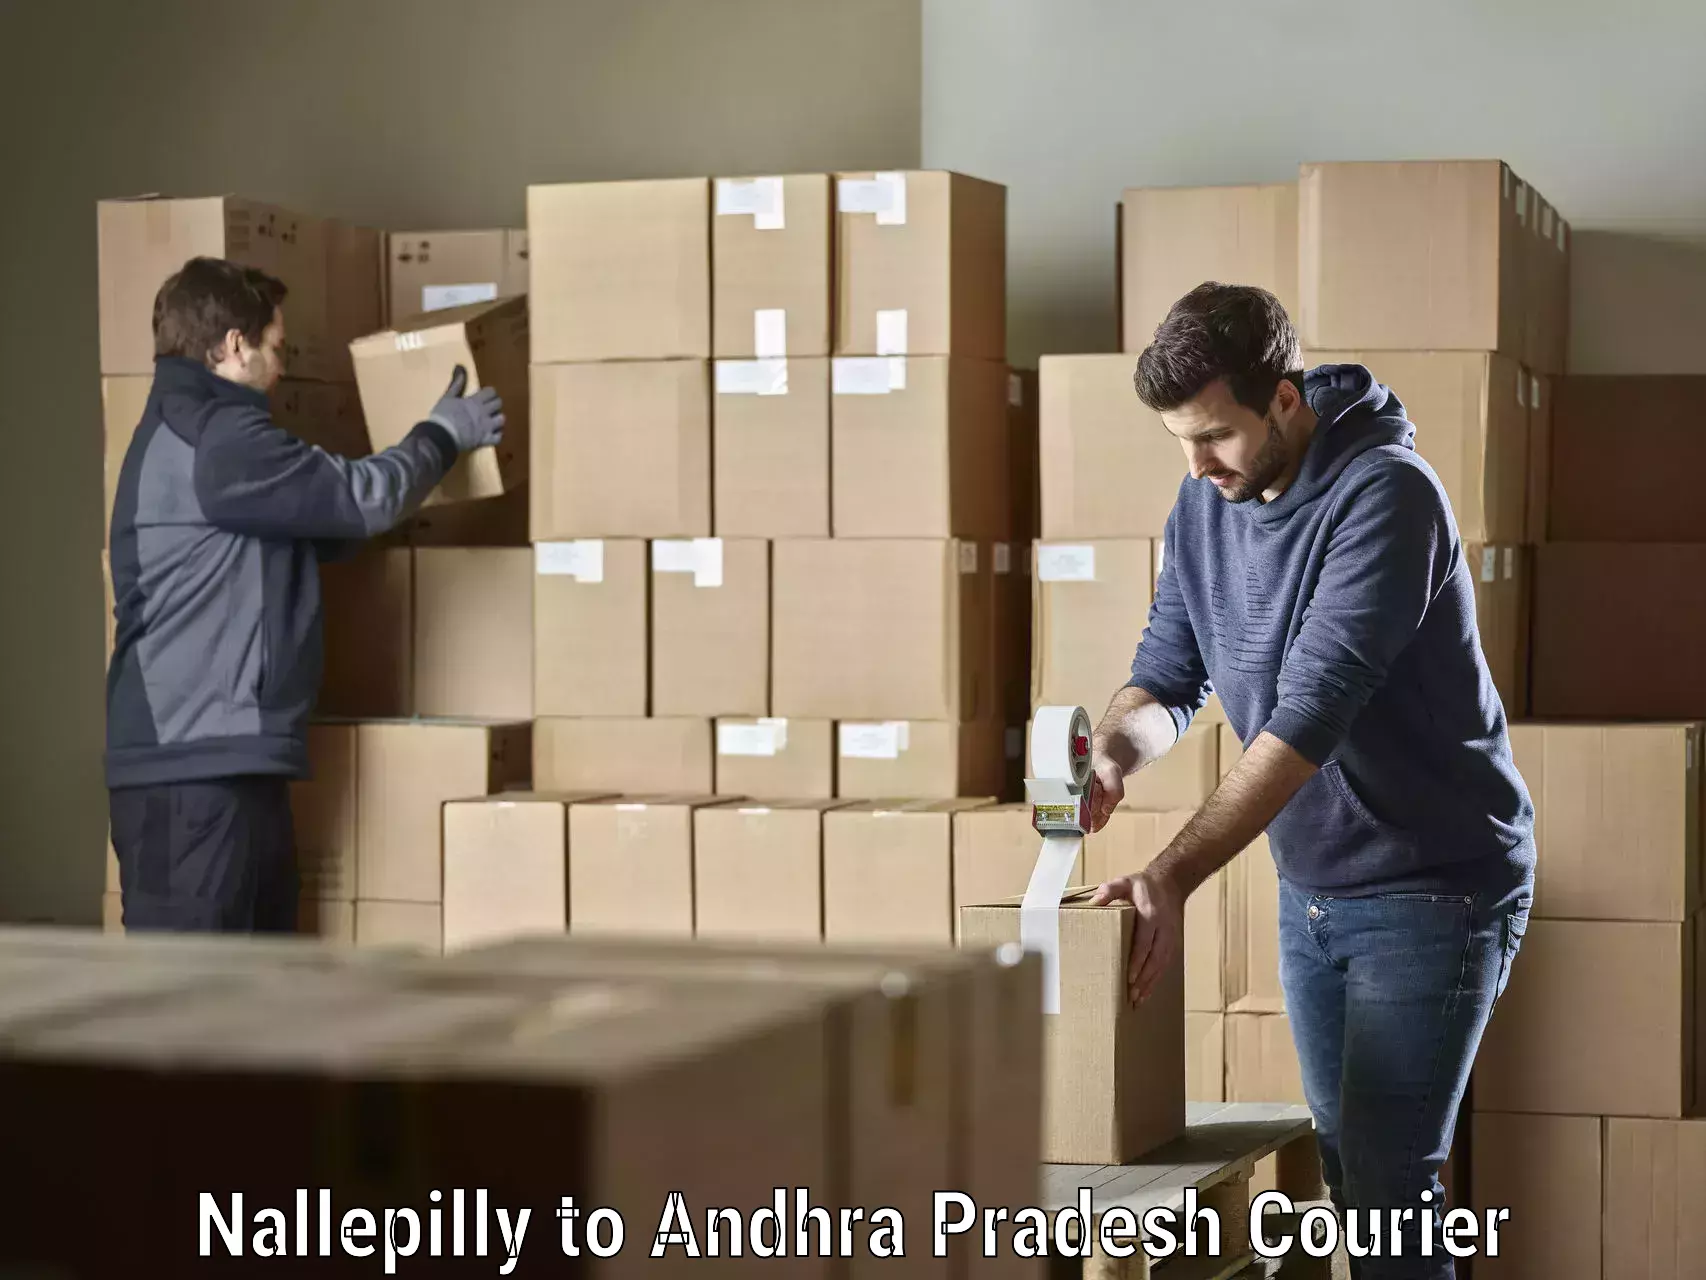 Courier service efficiency Nallepilly to Gajapathinagaram